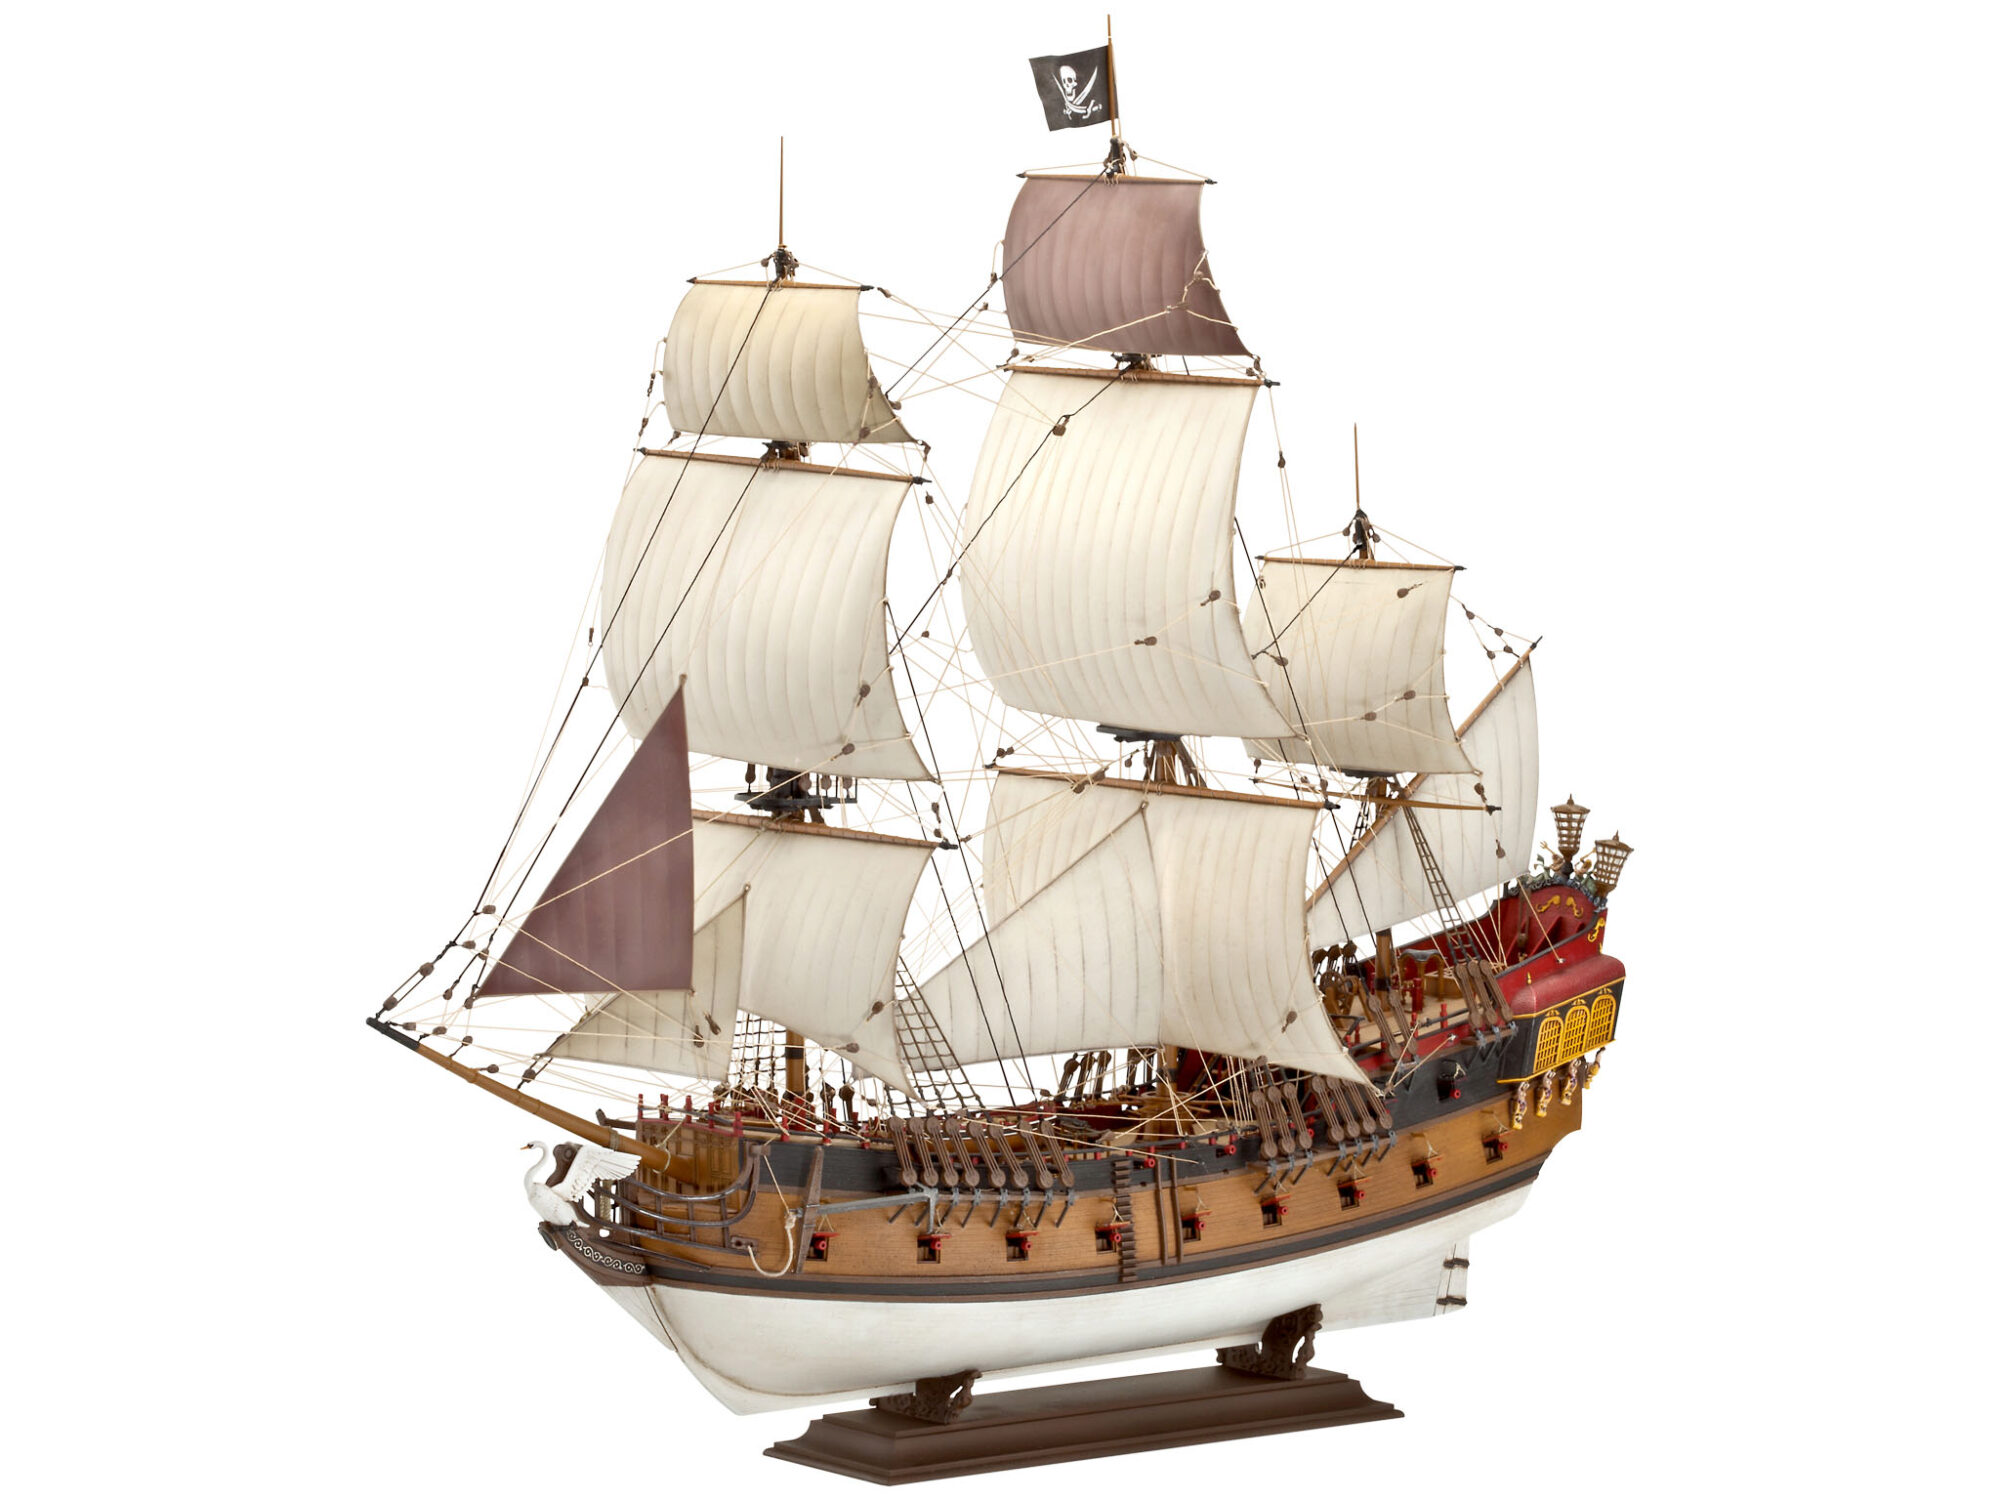 Revell 05605 PIRATE SHIP